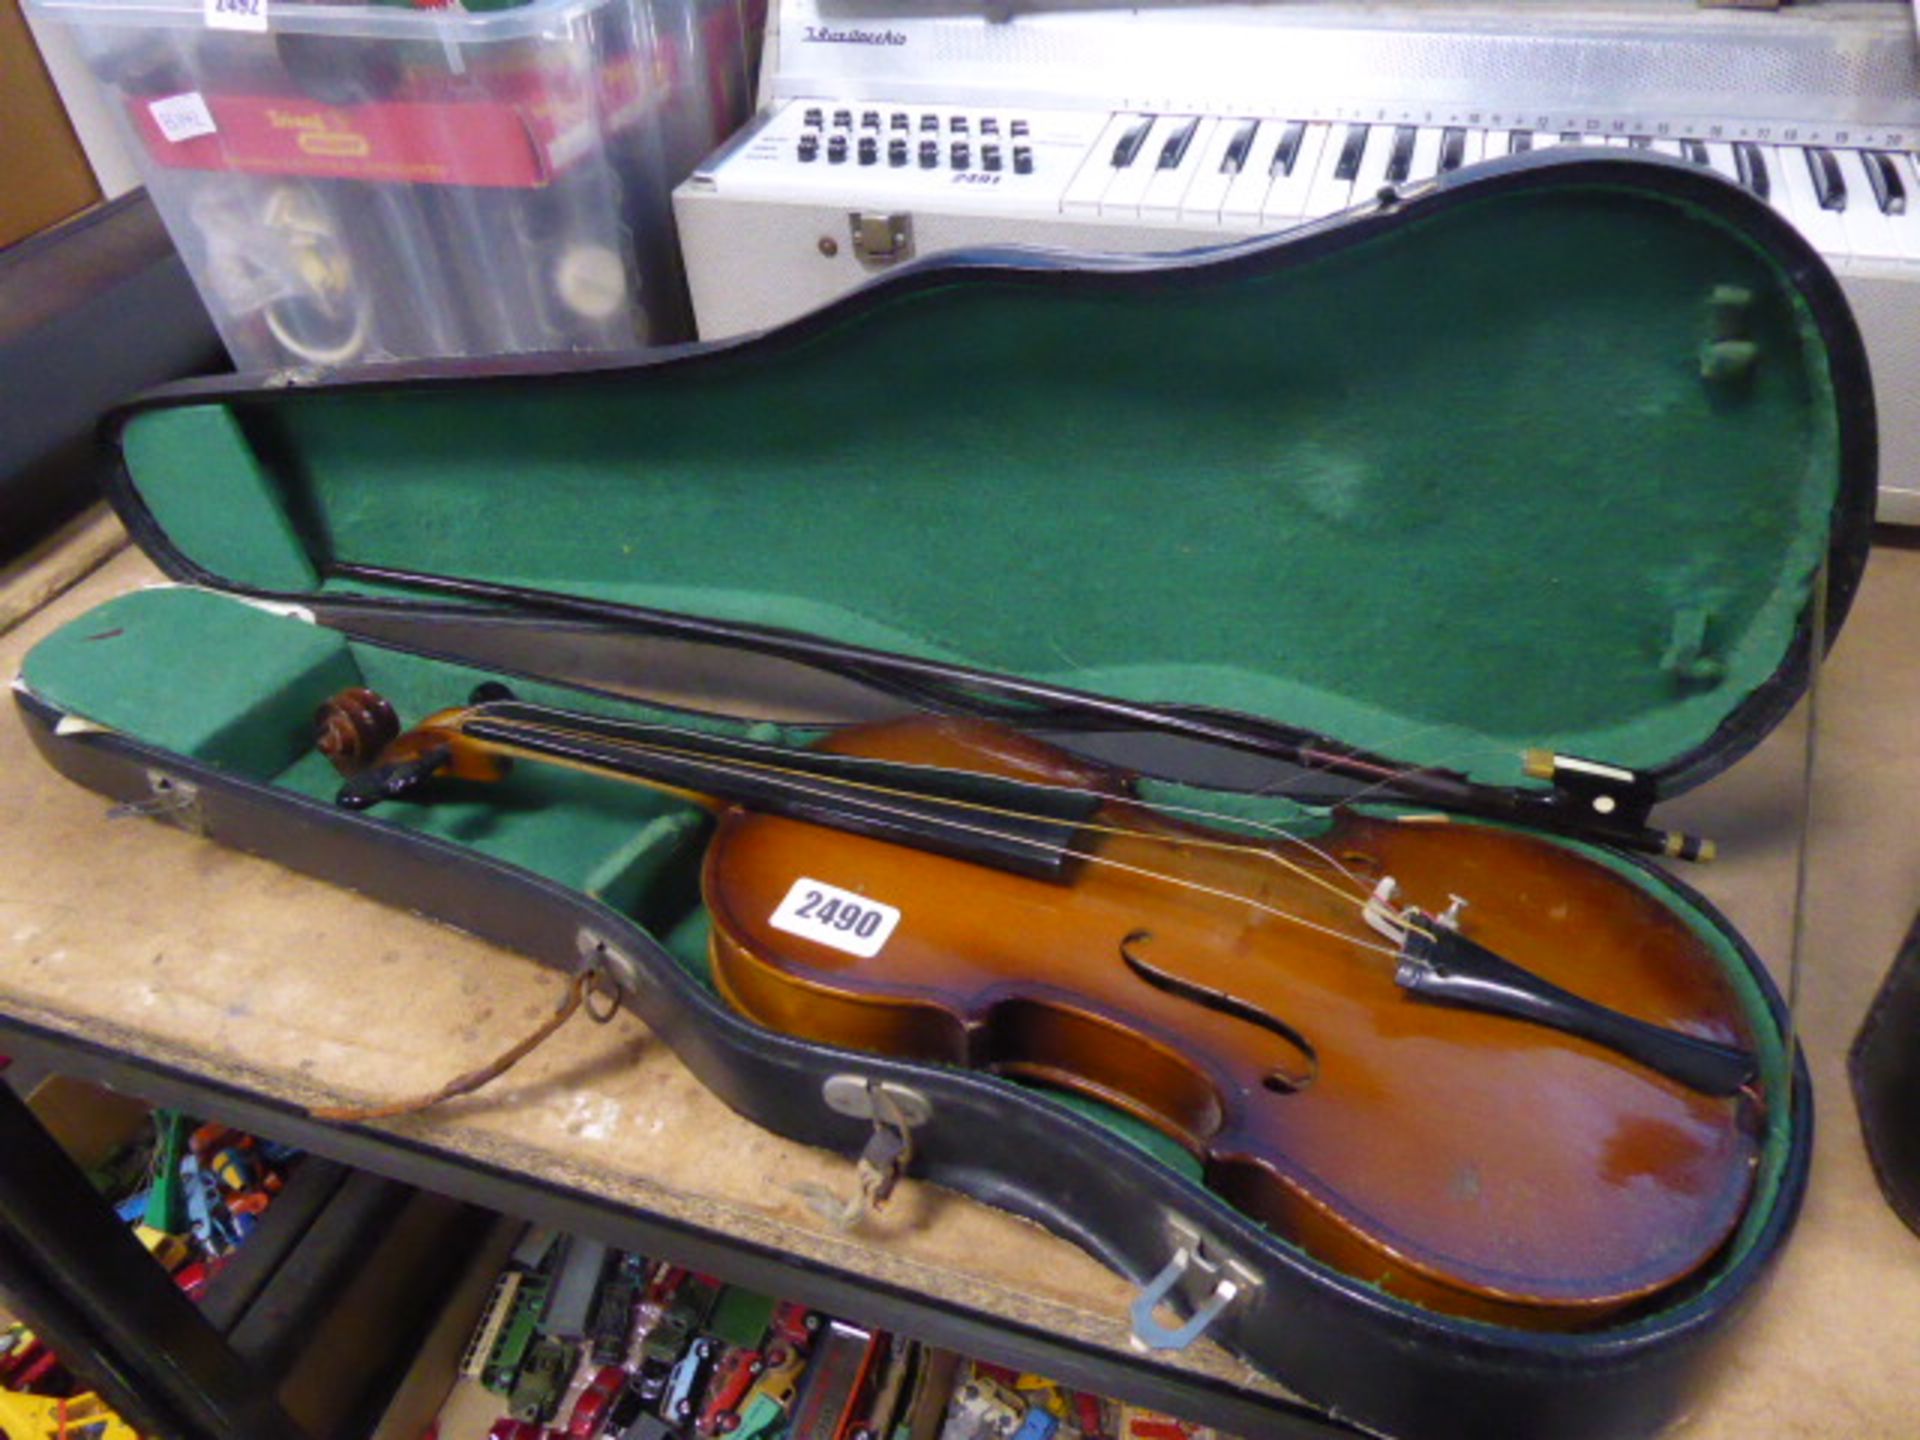 Violin with bow and case